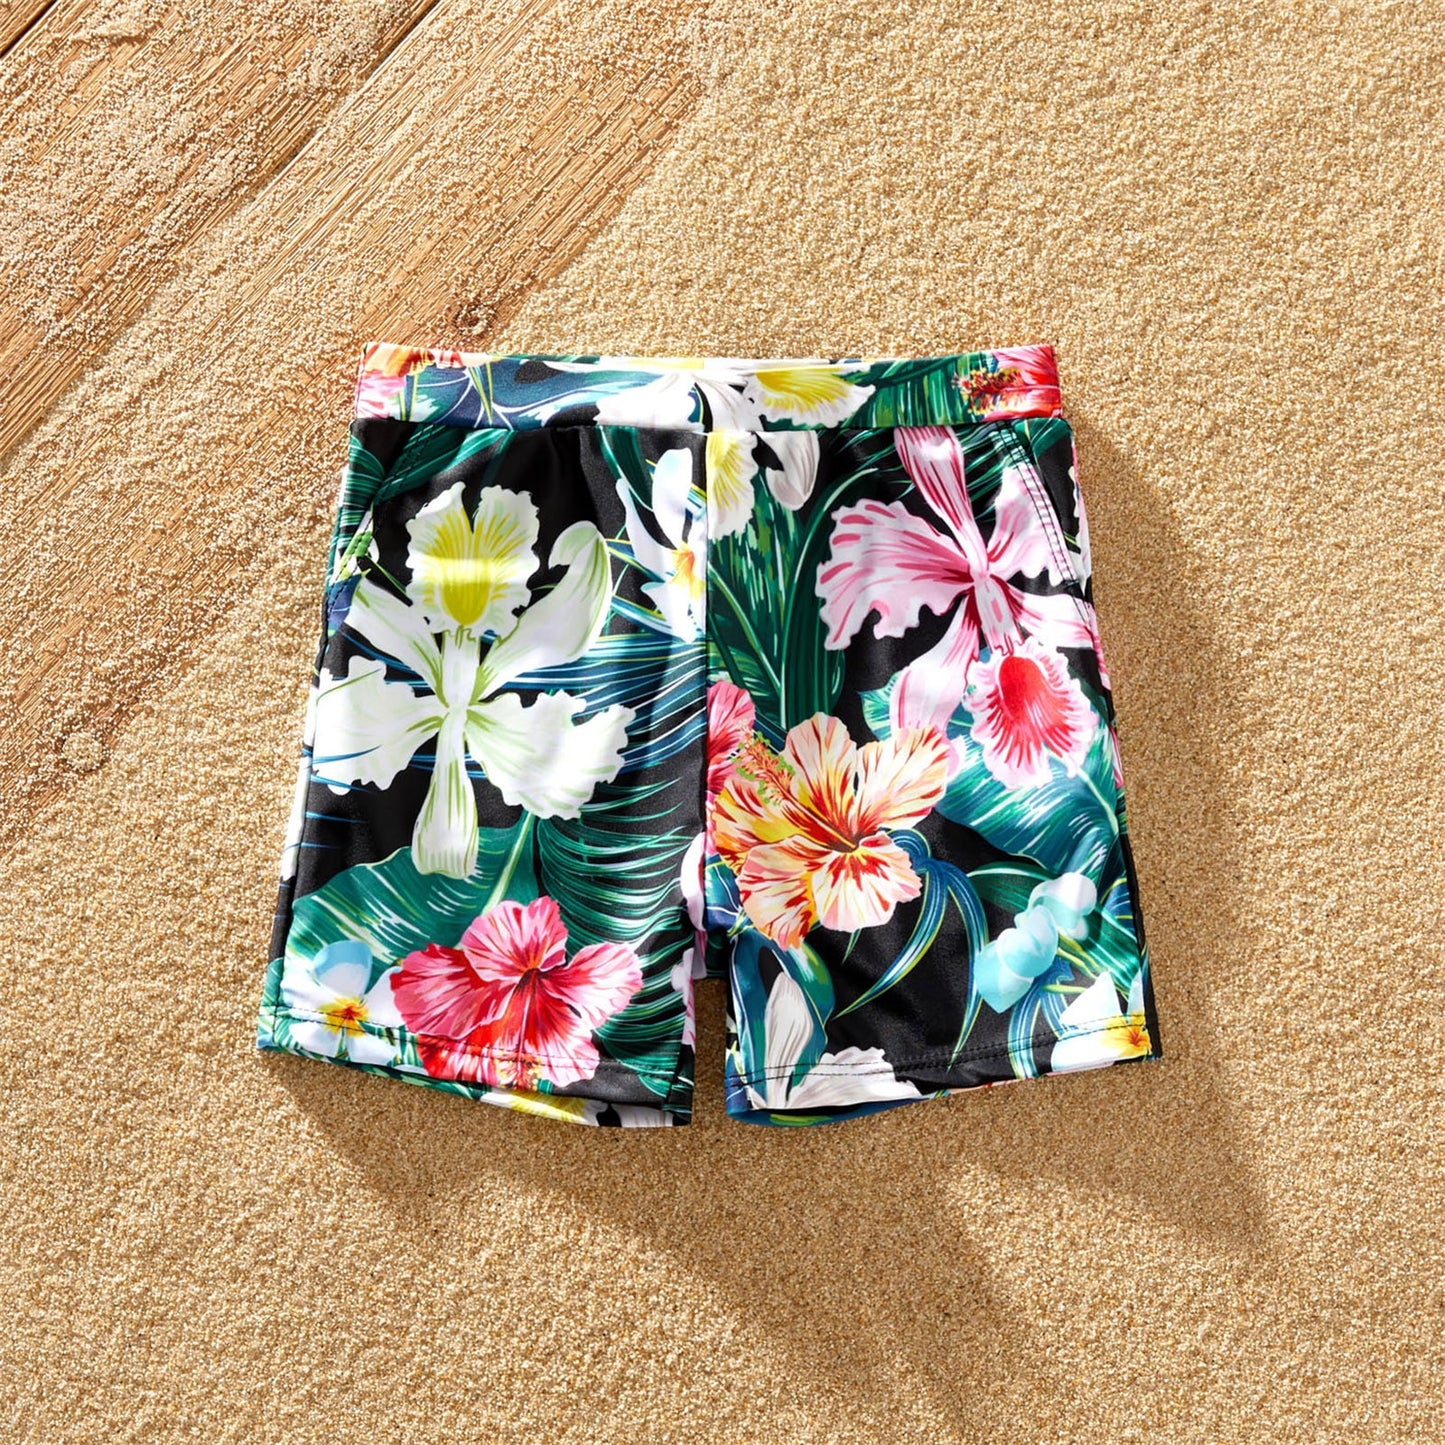 PatPat Family Matching Allover Floral Print Swim Trunks Shorts and Spaghetti Strap One-Piece Swimsuit